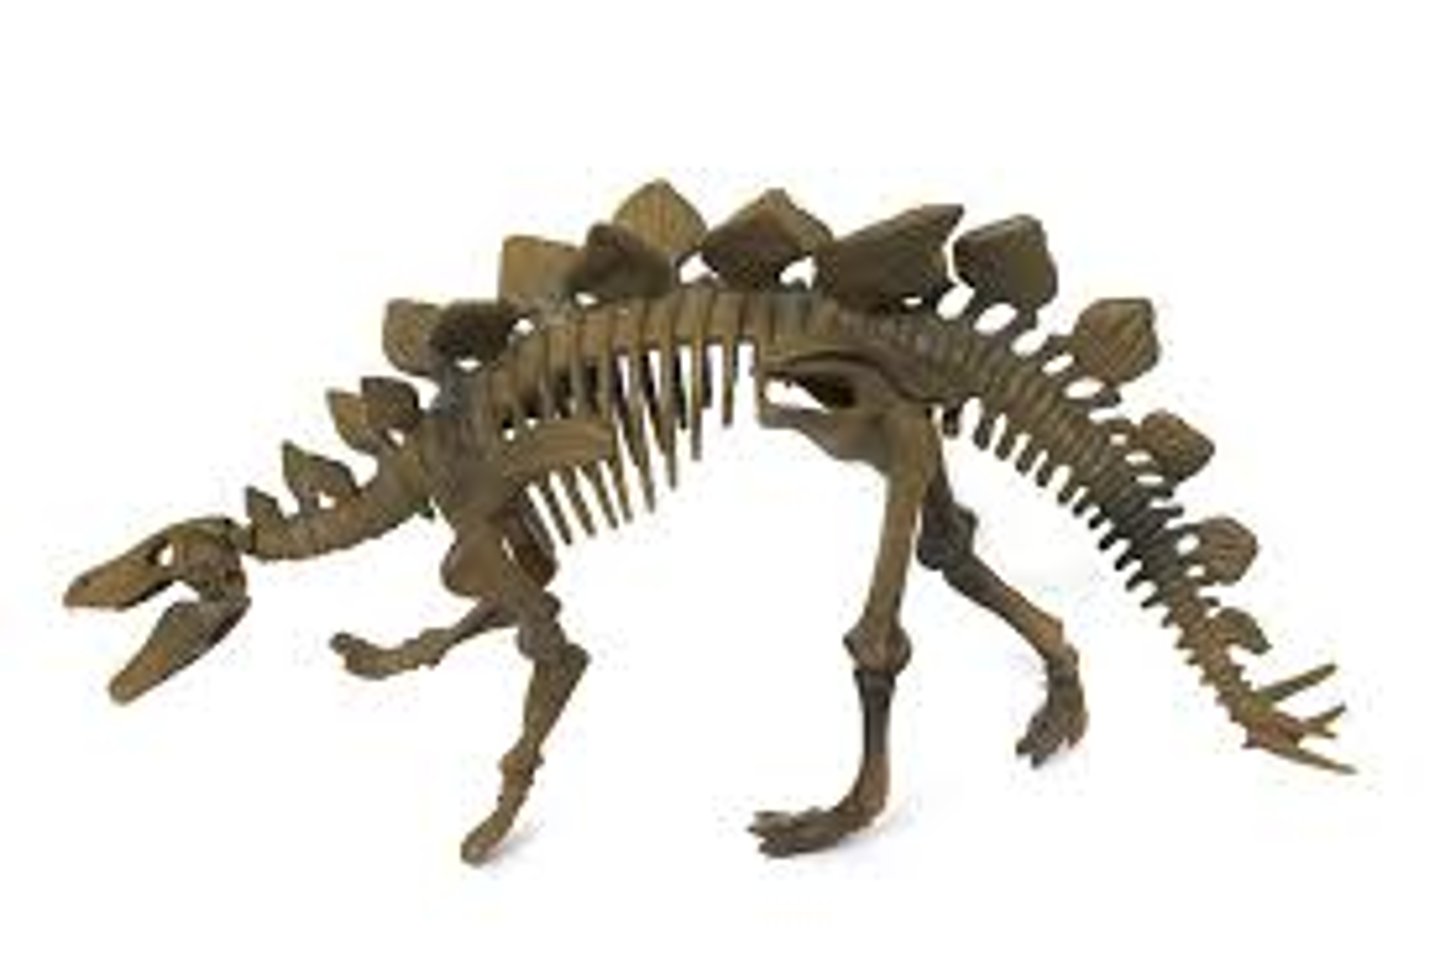 <p>Genus of armored dinosaur. It is one of the most recognizable dinosaurs, with its double row of kite-shaped plates on its back and the two pairs of spikes on its tail. It lived in what is now western North America. In 2006, a specimen was also found in Portugal, showing that they were also present in Europe. Lived during the late Jurassic.</p>